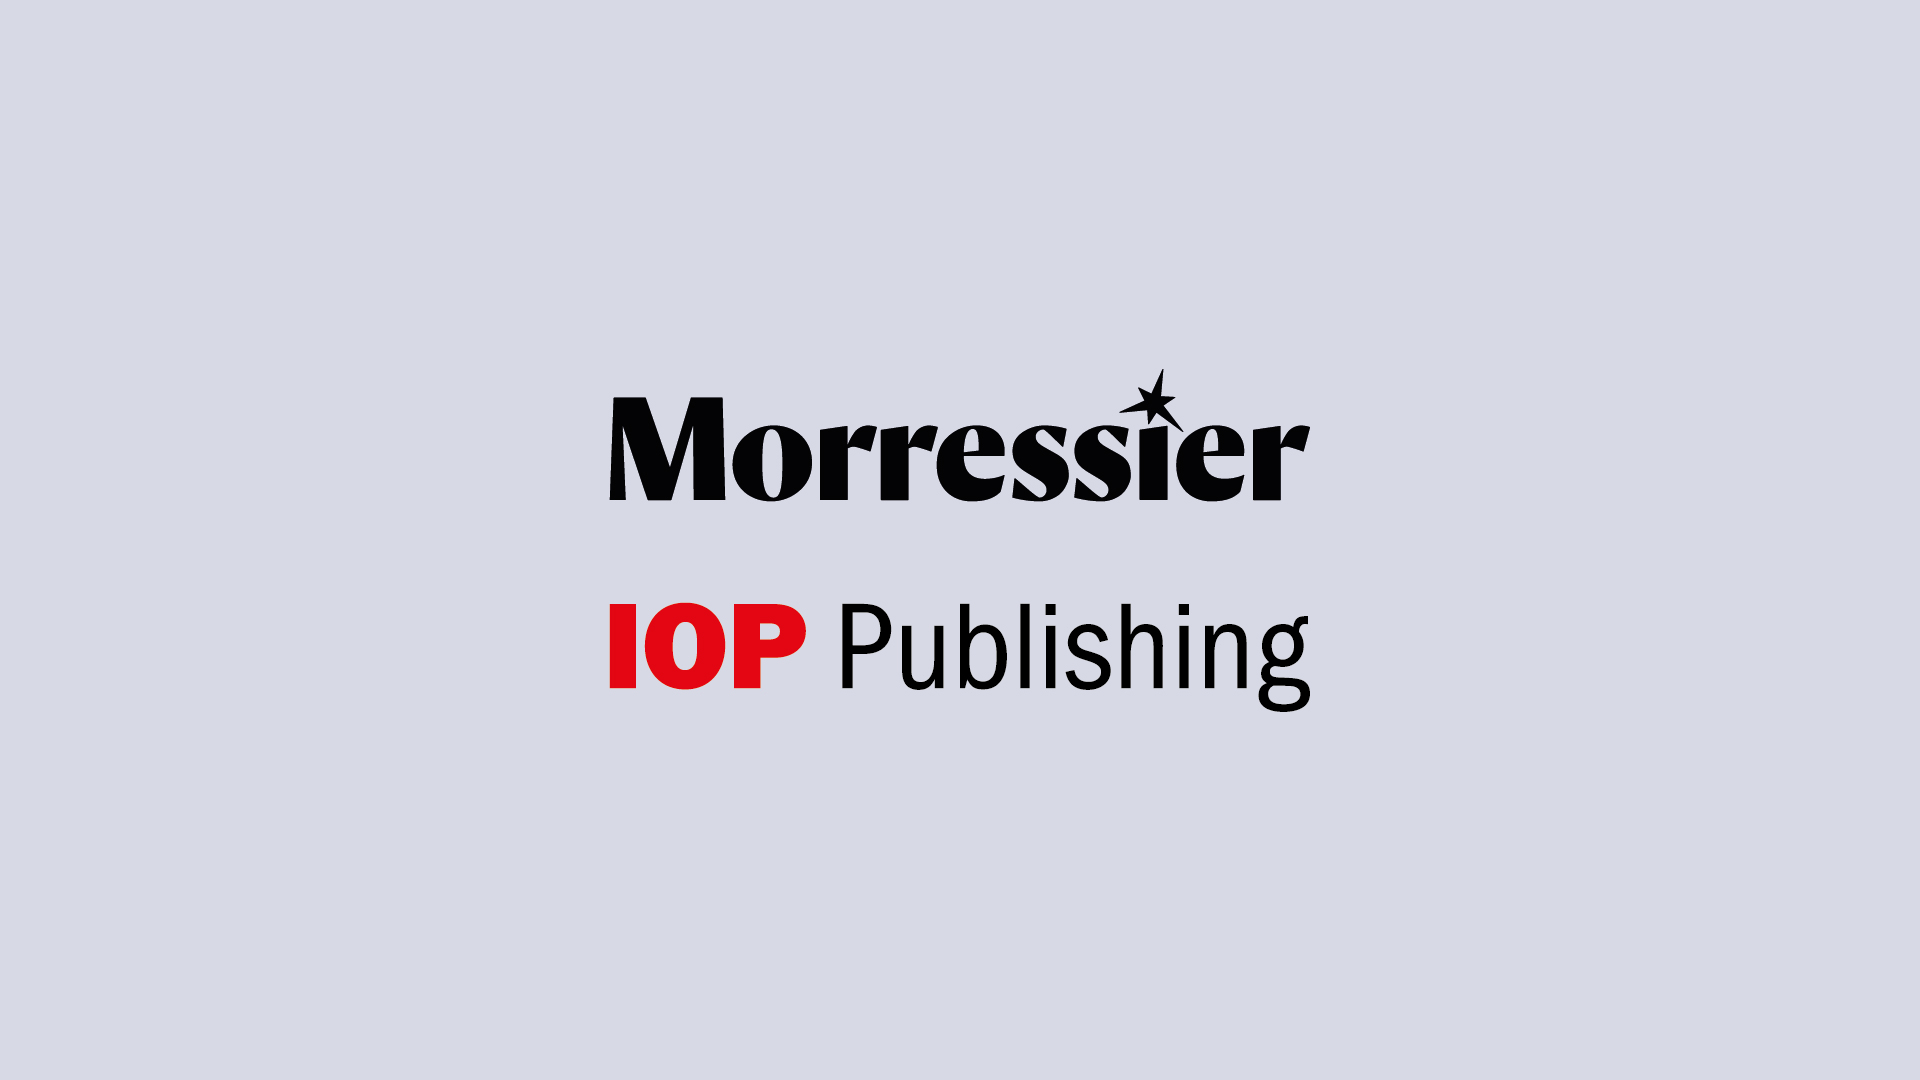 Morressier and IOP Publishing logos